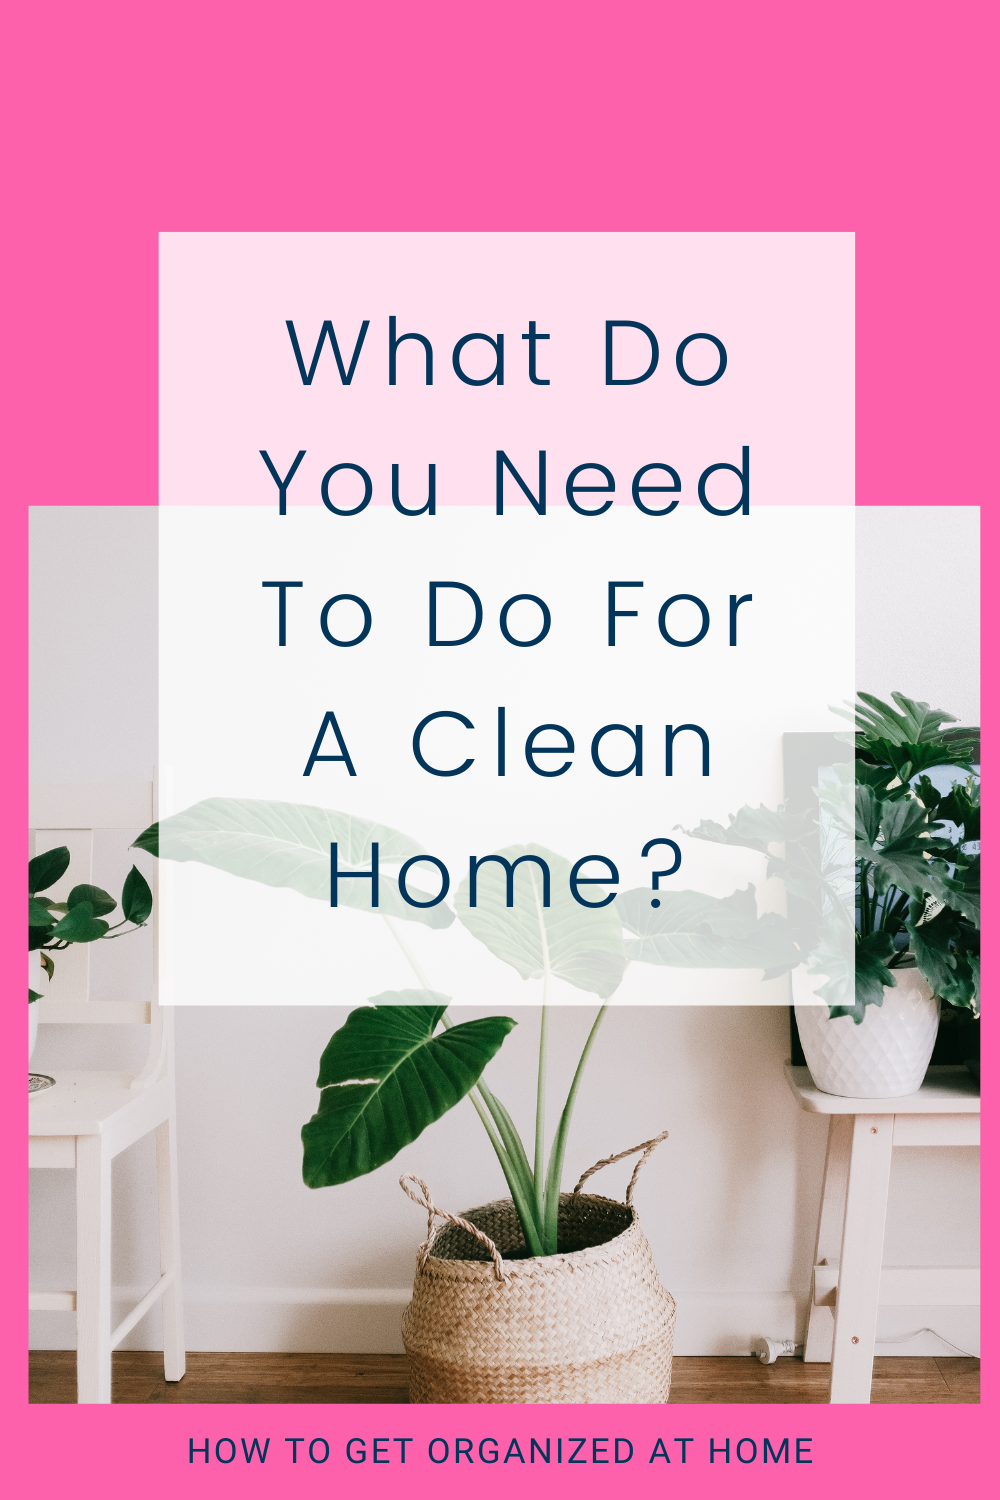 https://howtogetorganizedathome.com/wp-content/uploads/2021/03/What-Do-You-Need-To-Do-For-A-Clean-Home.png